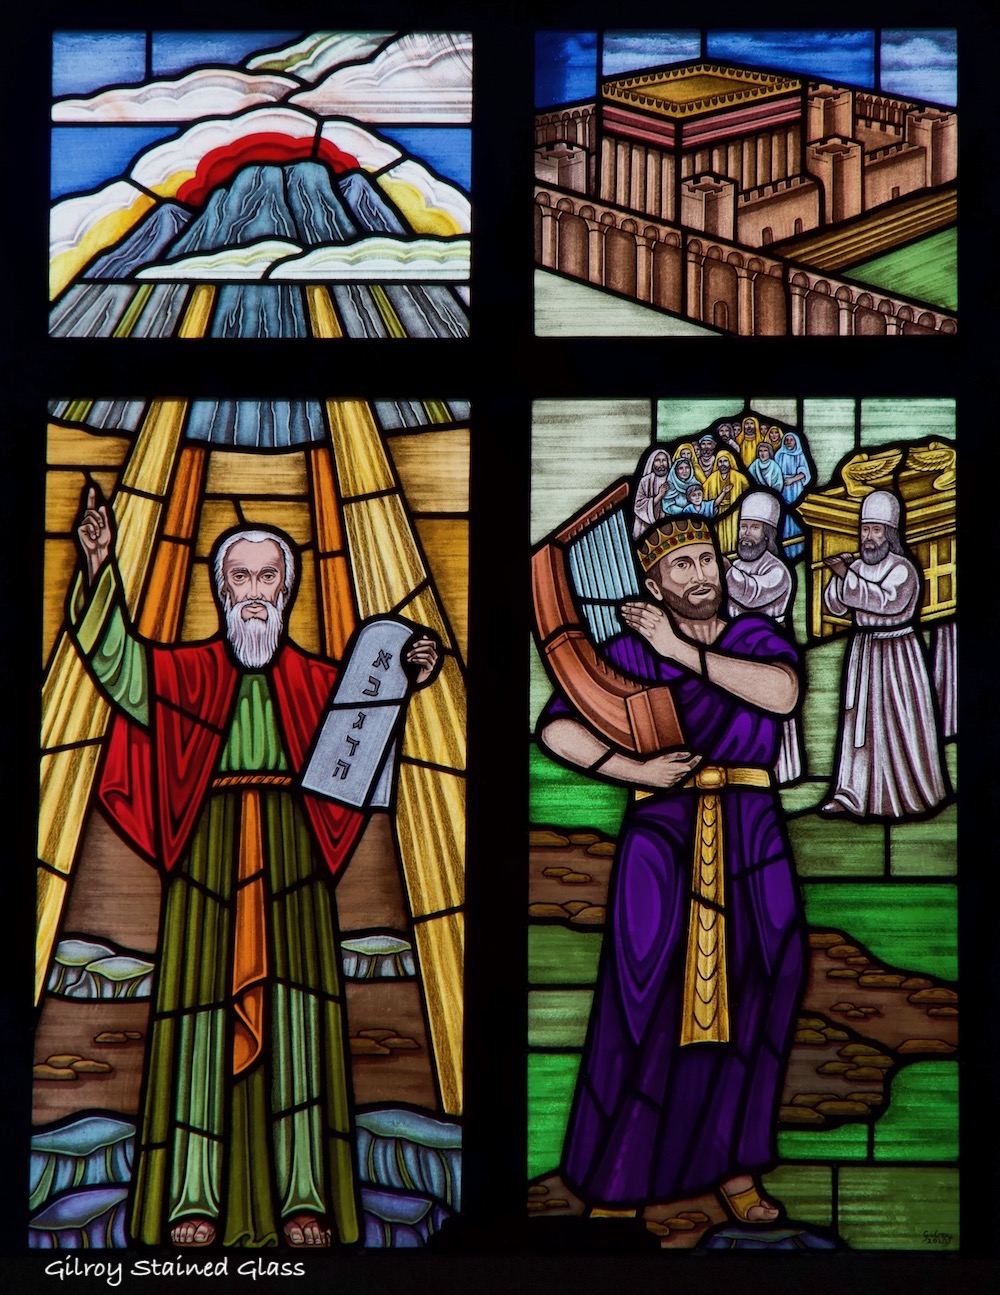 Moses & King David ©Gilroy Stained Glass